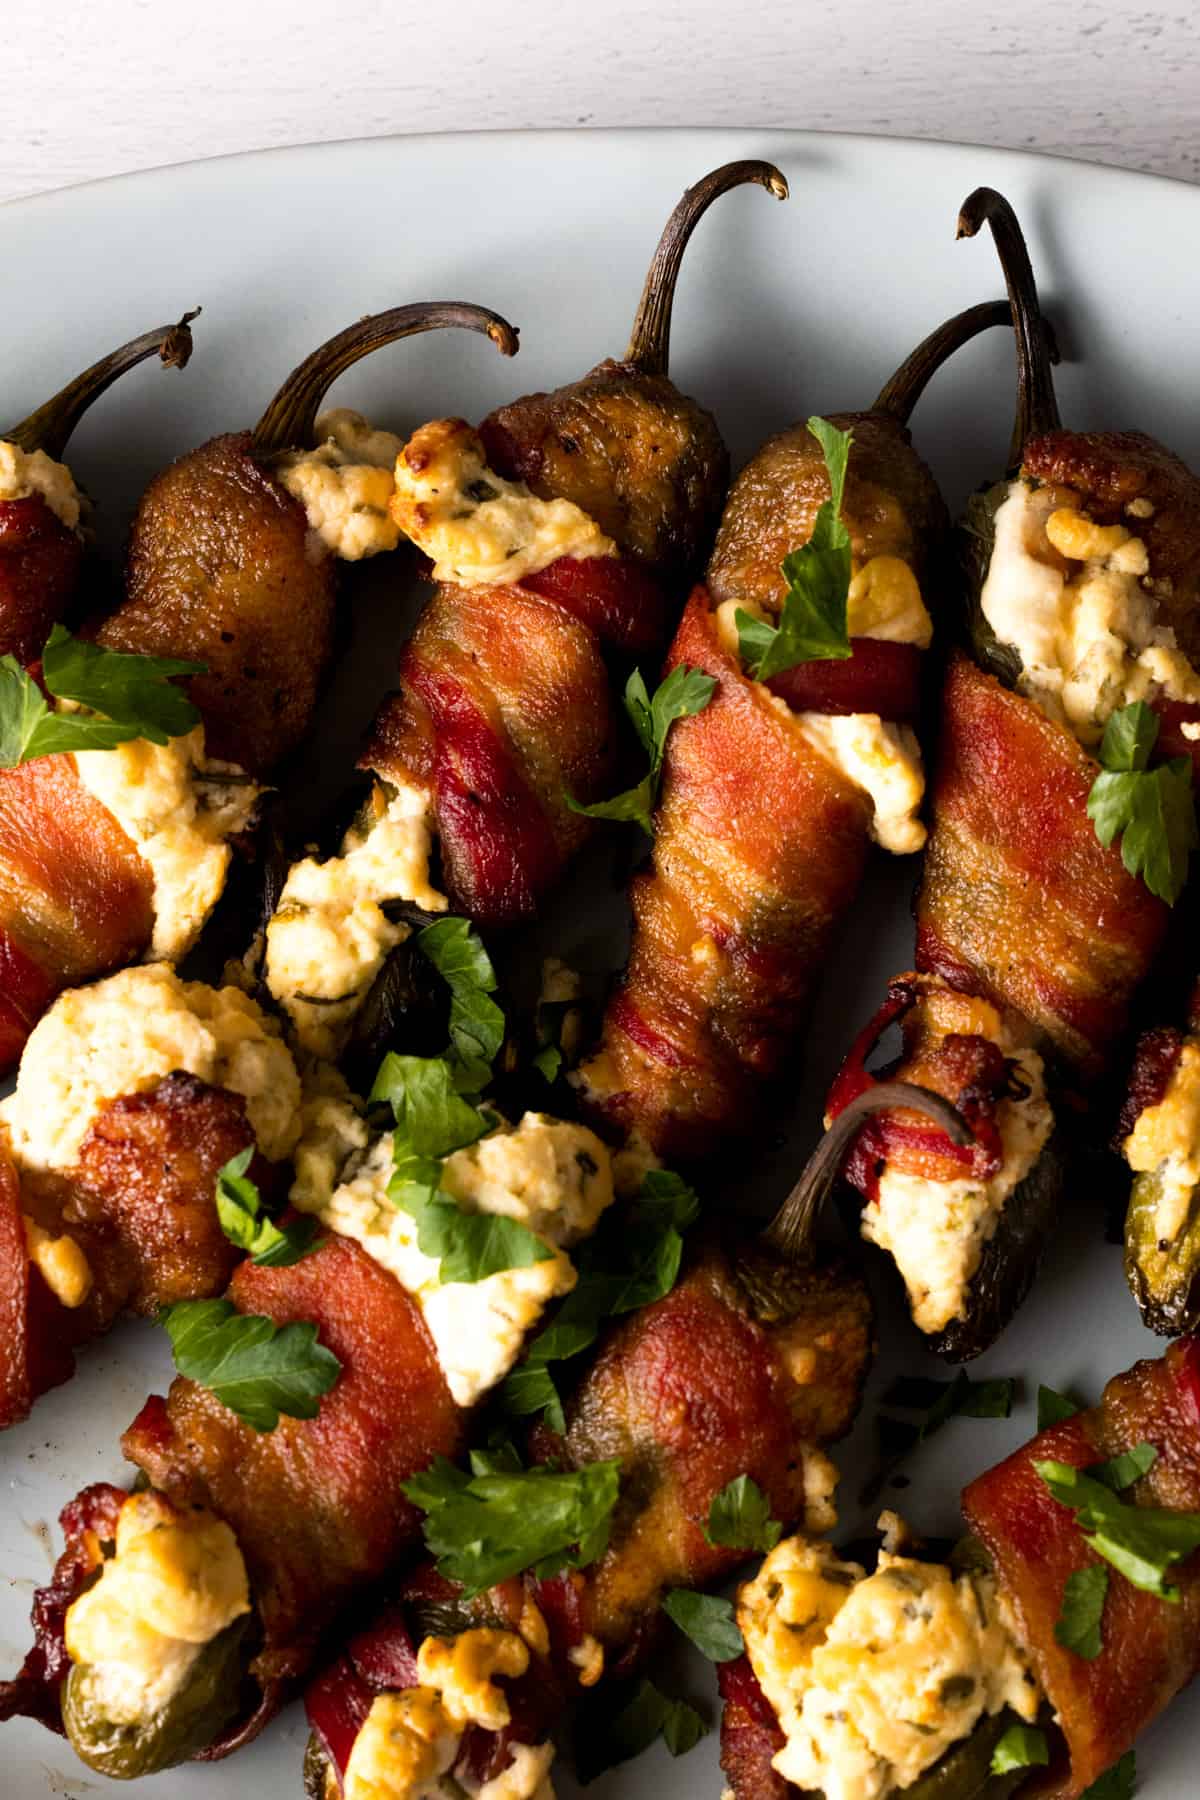 Bacon wrapped jalapeno poppers on white plate.